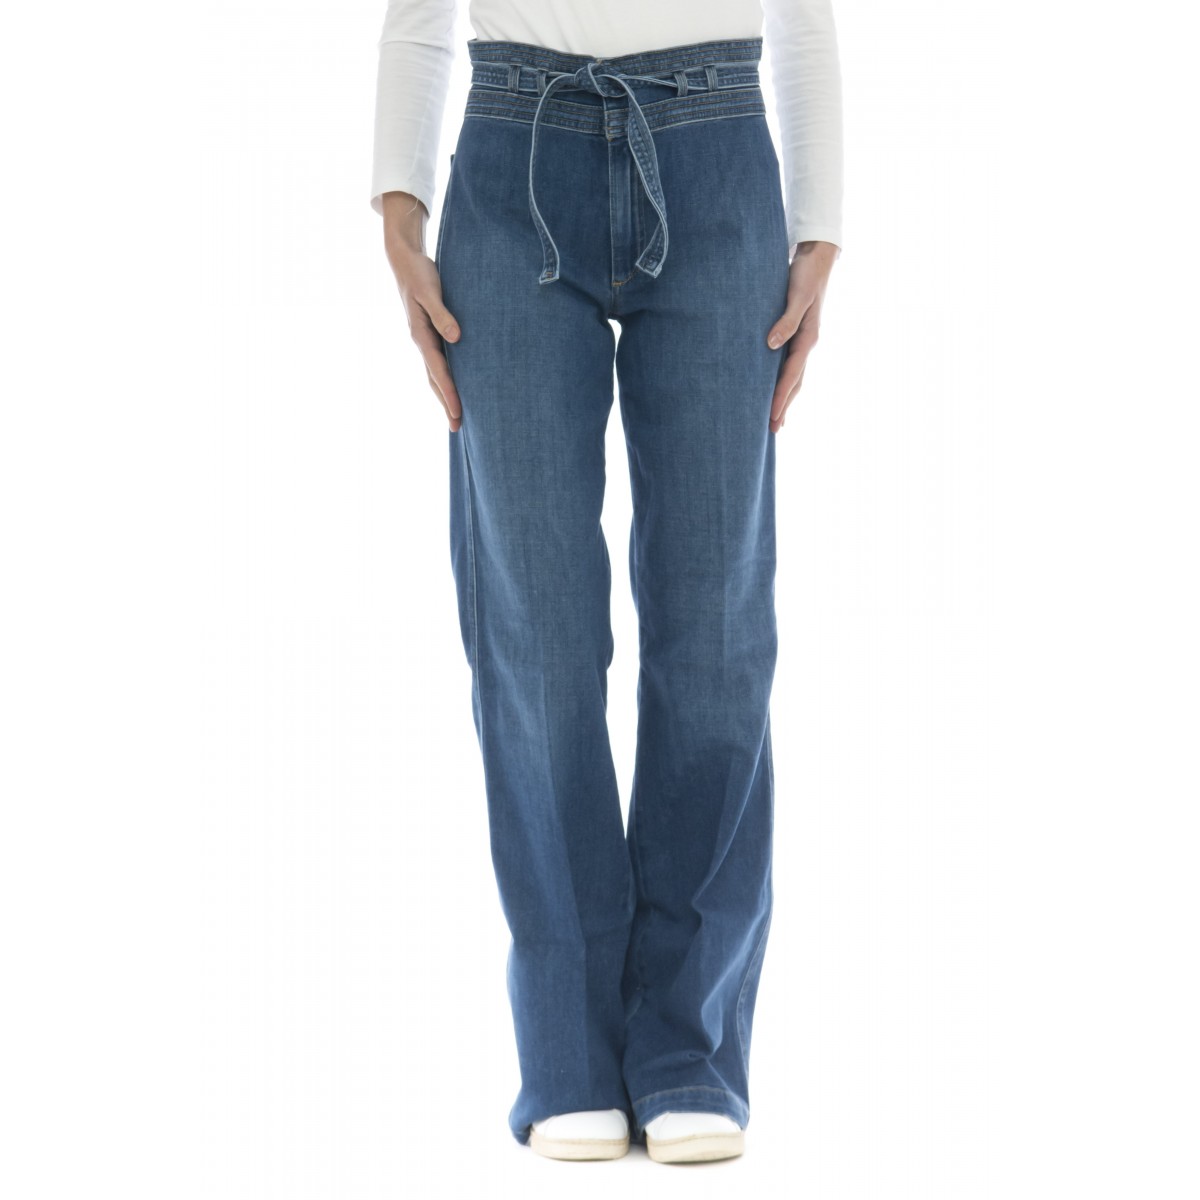 Jeans - 5715 penny flare